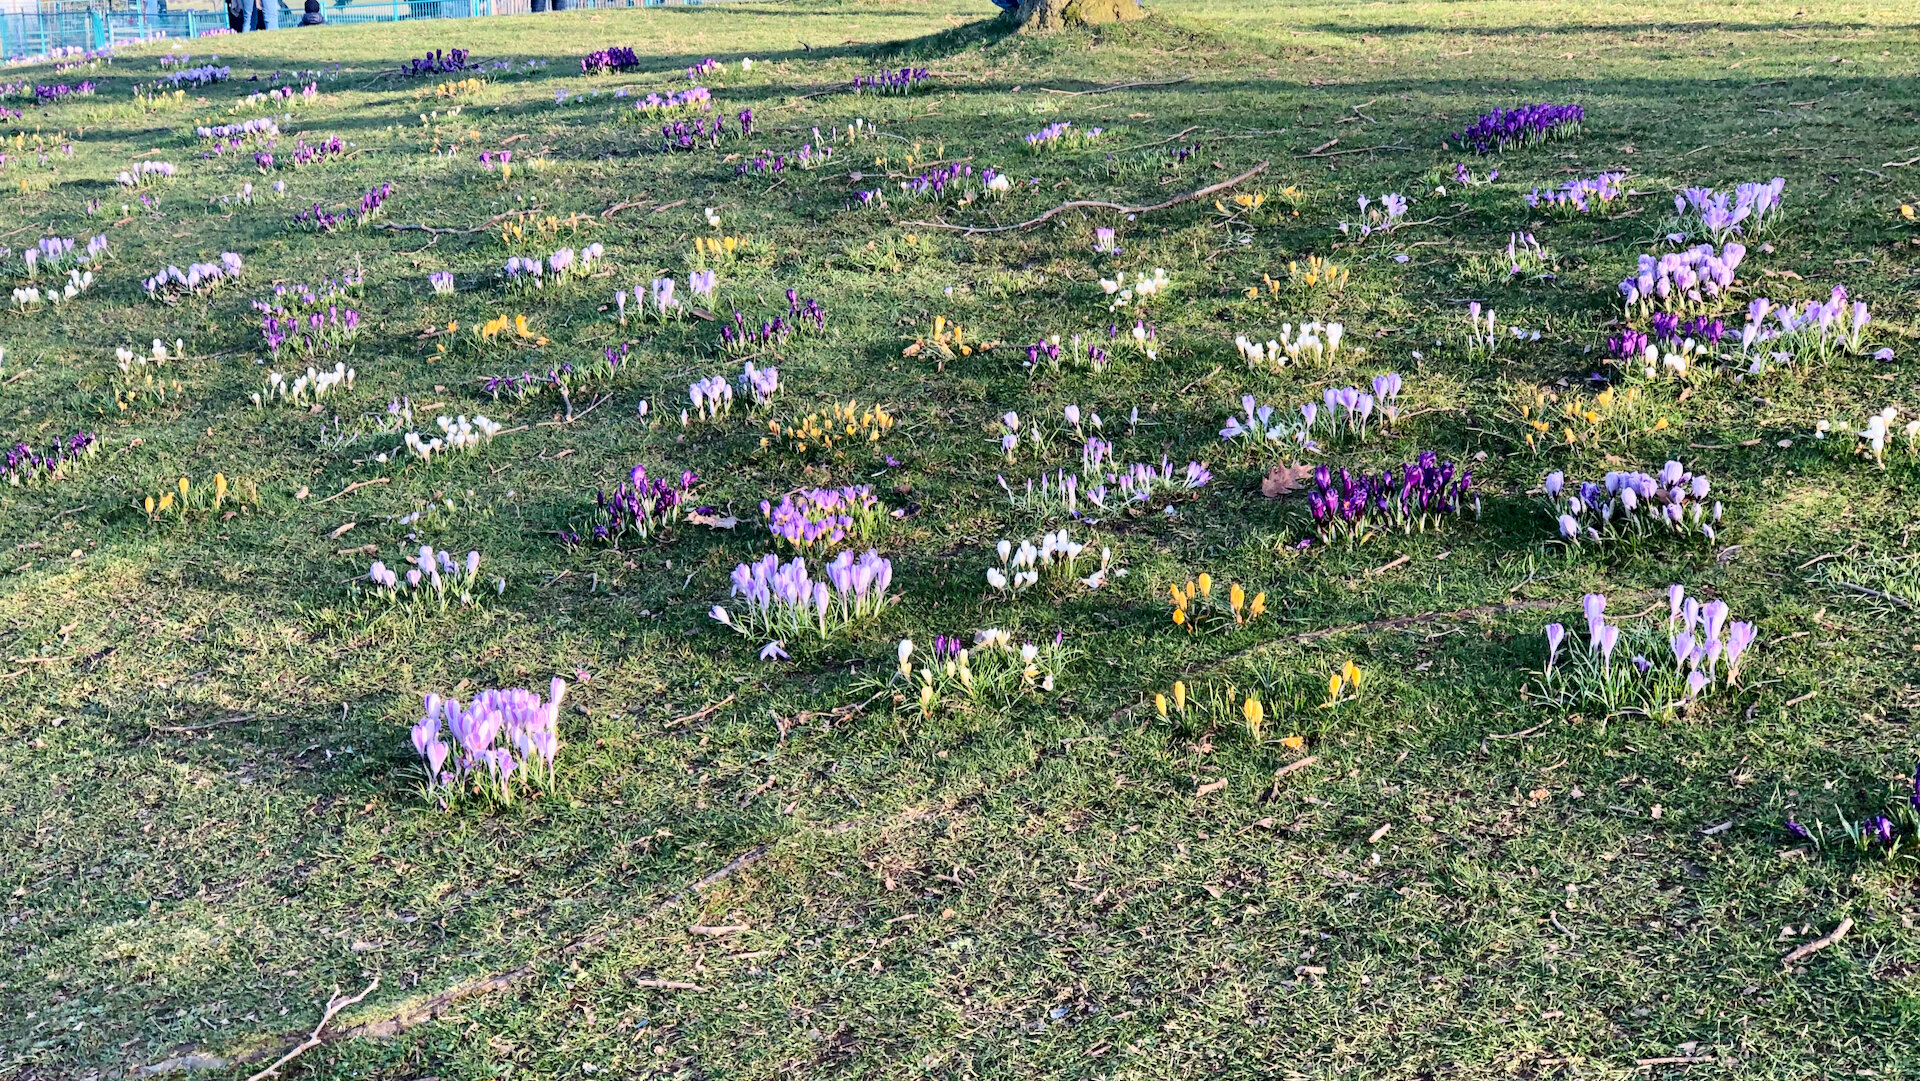  There’s a small hill along the seawall that every spring bursts with crocuses. It gets bigger every year, and is beautiful to see. 